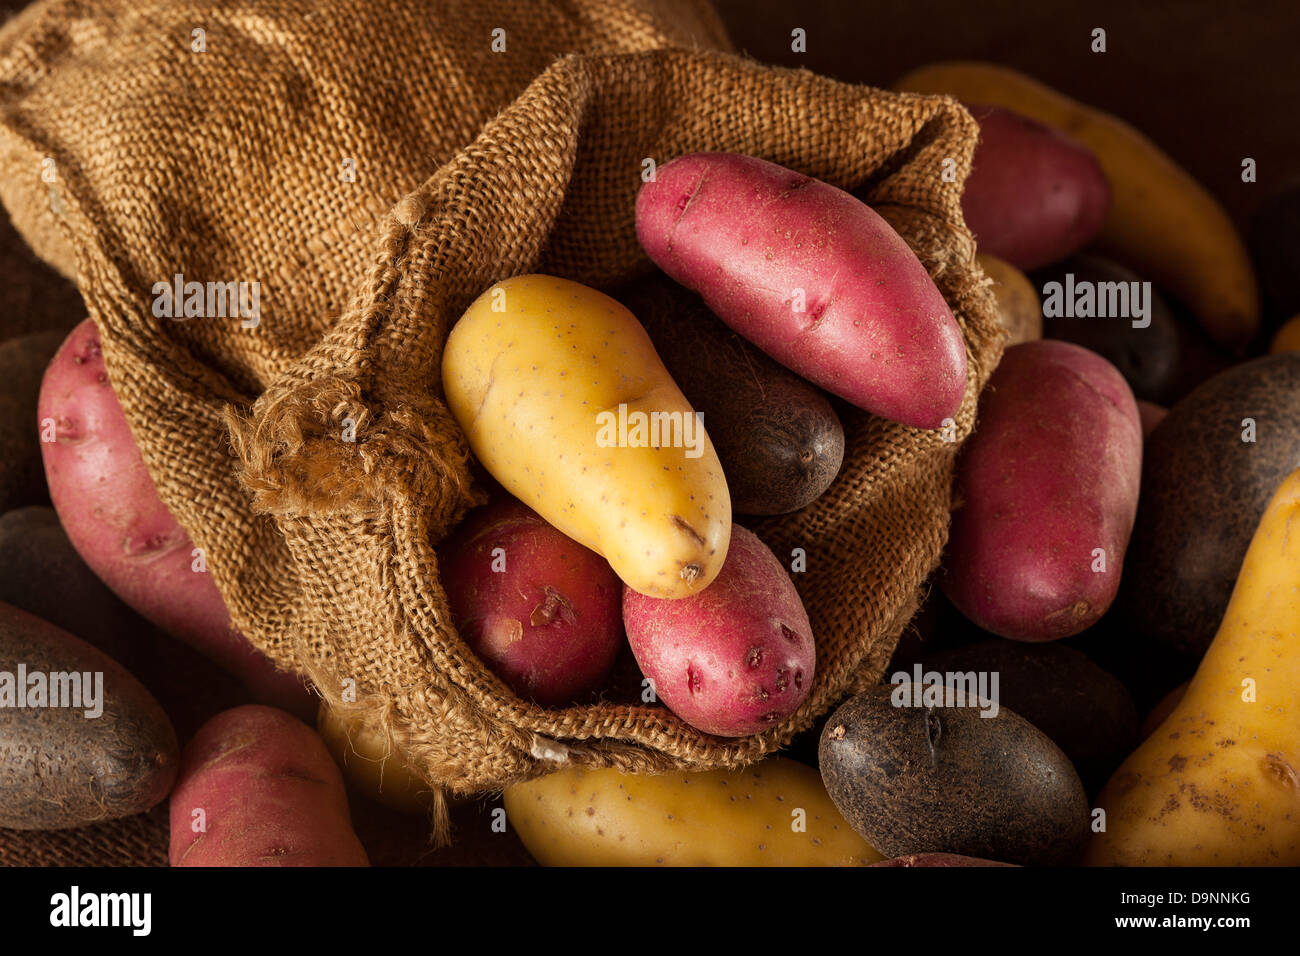 raw organic fingerling potato medley against a background Stock Photo